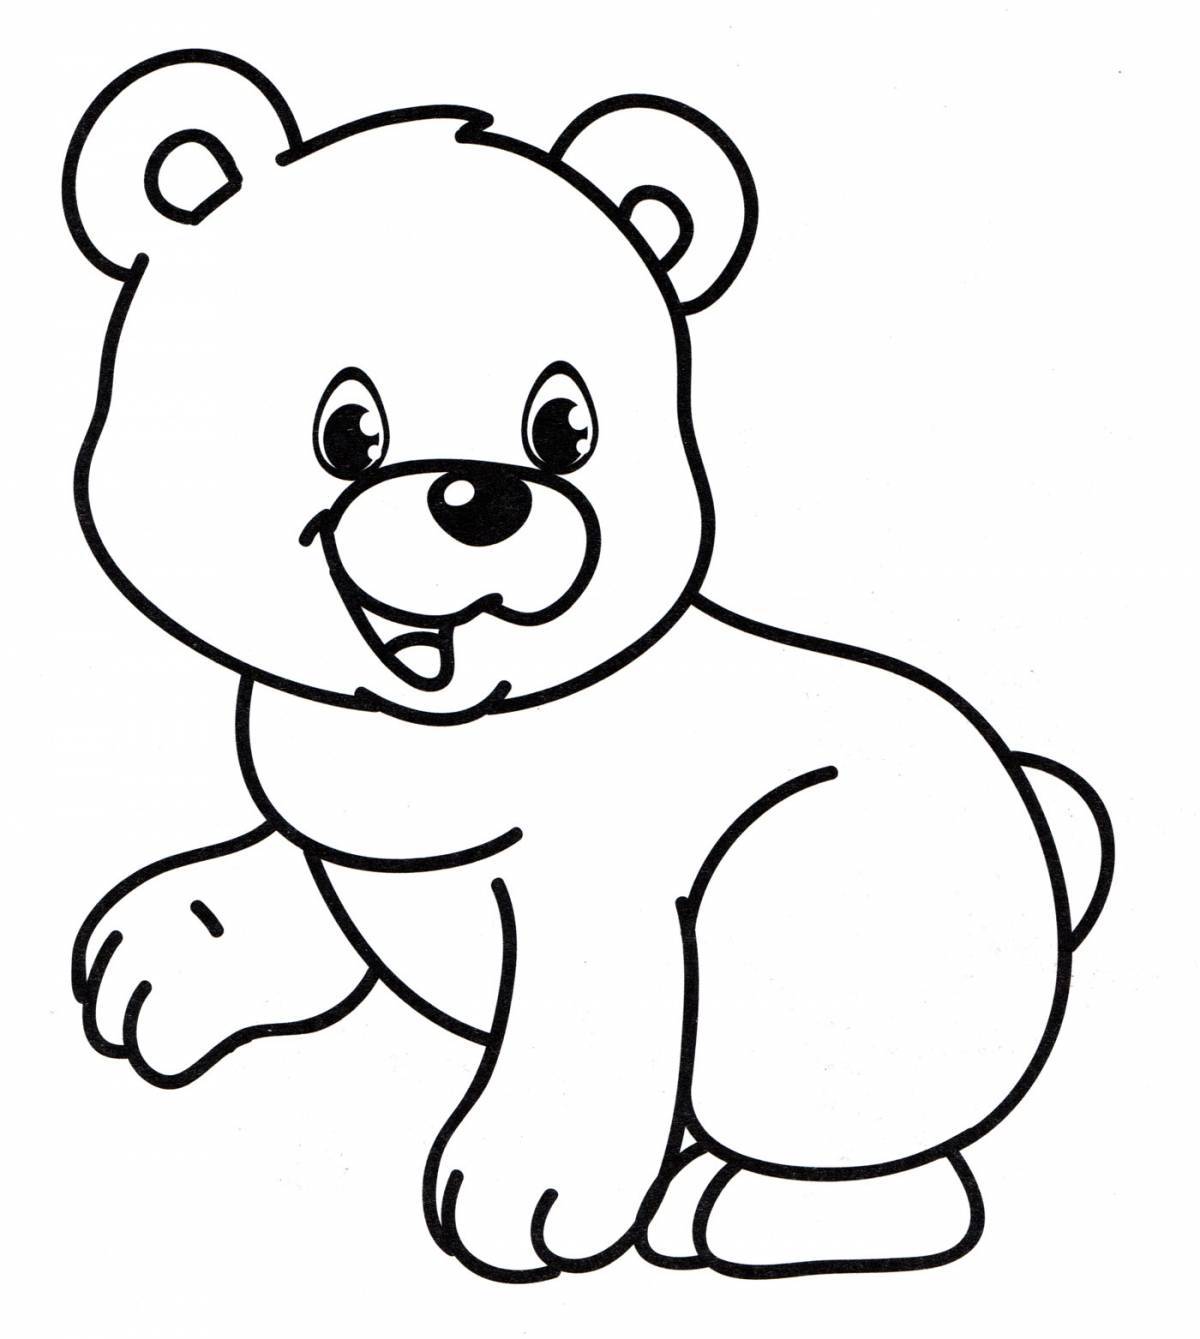 Sniffing bear coloring page